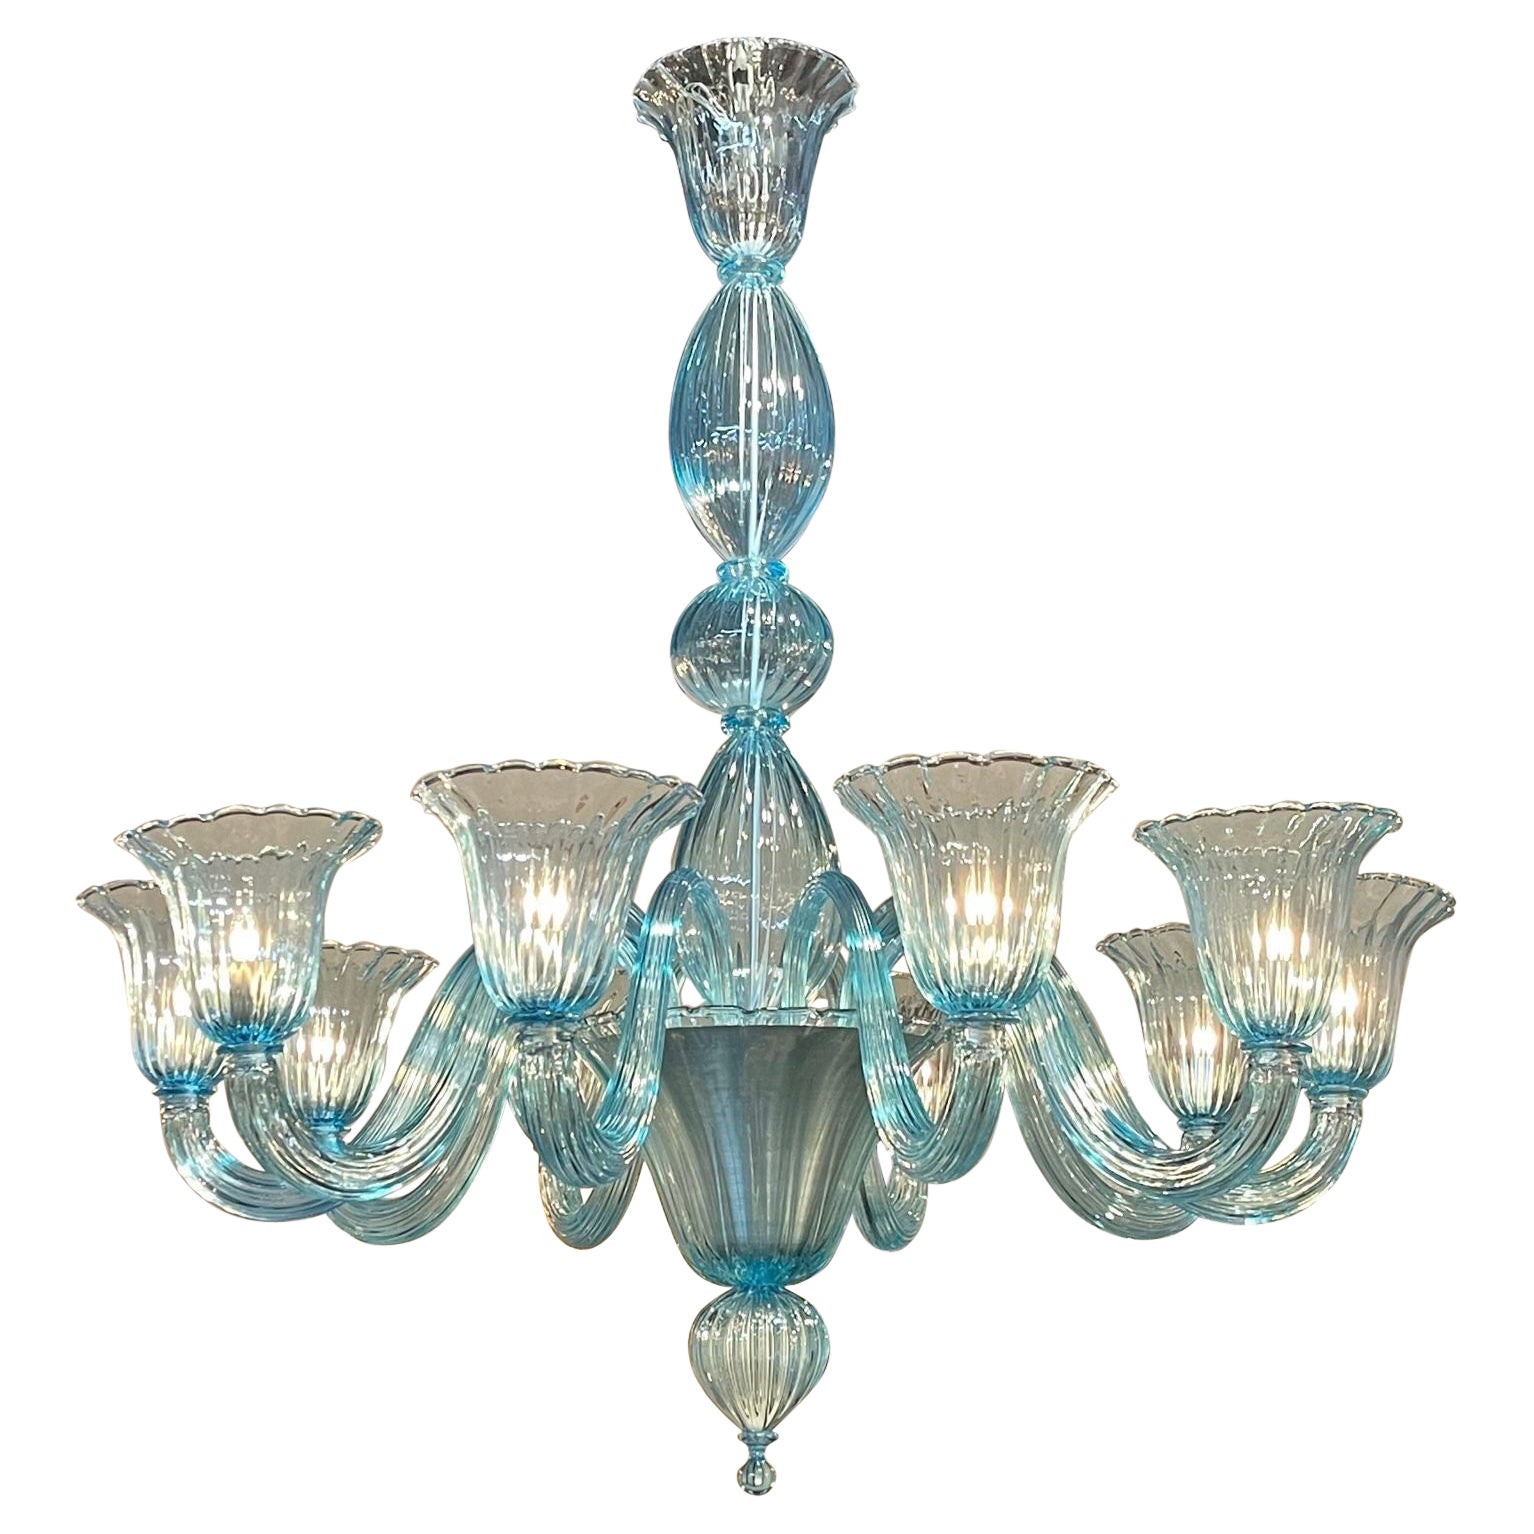 Modern Blue Murano Glass Chandelier with 10 Lights